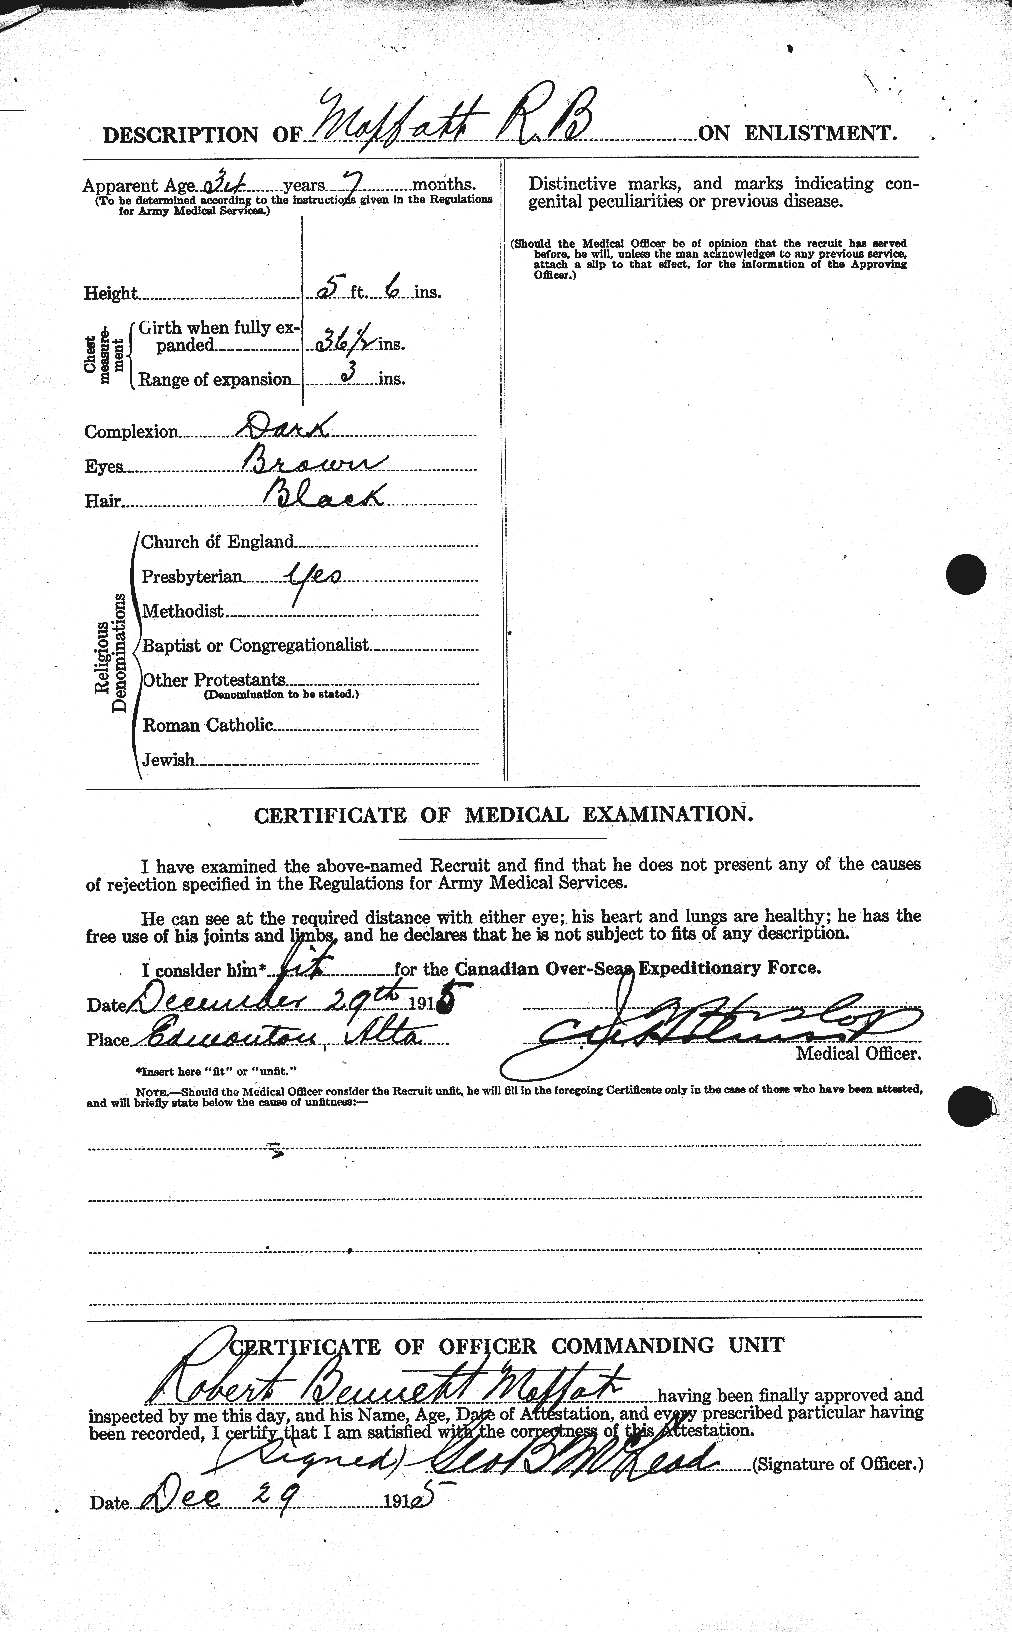 Personnel Records of the First World War - CEF 499186b